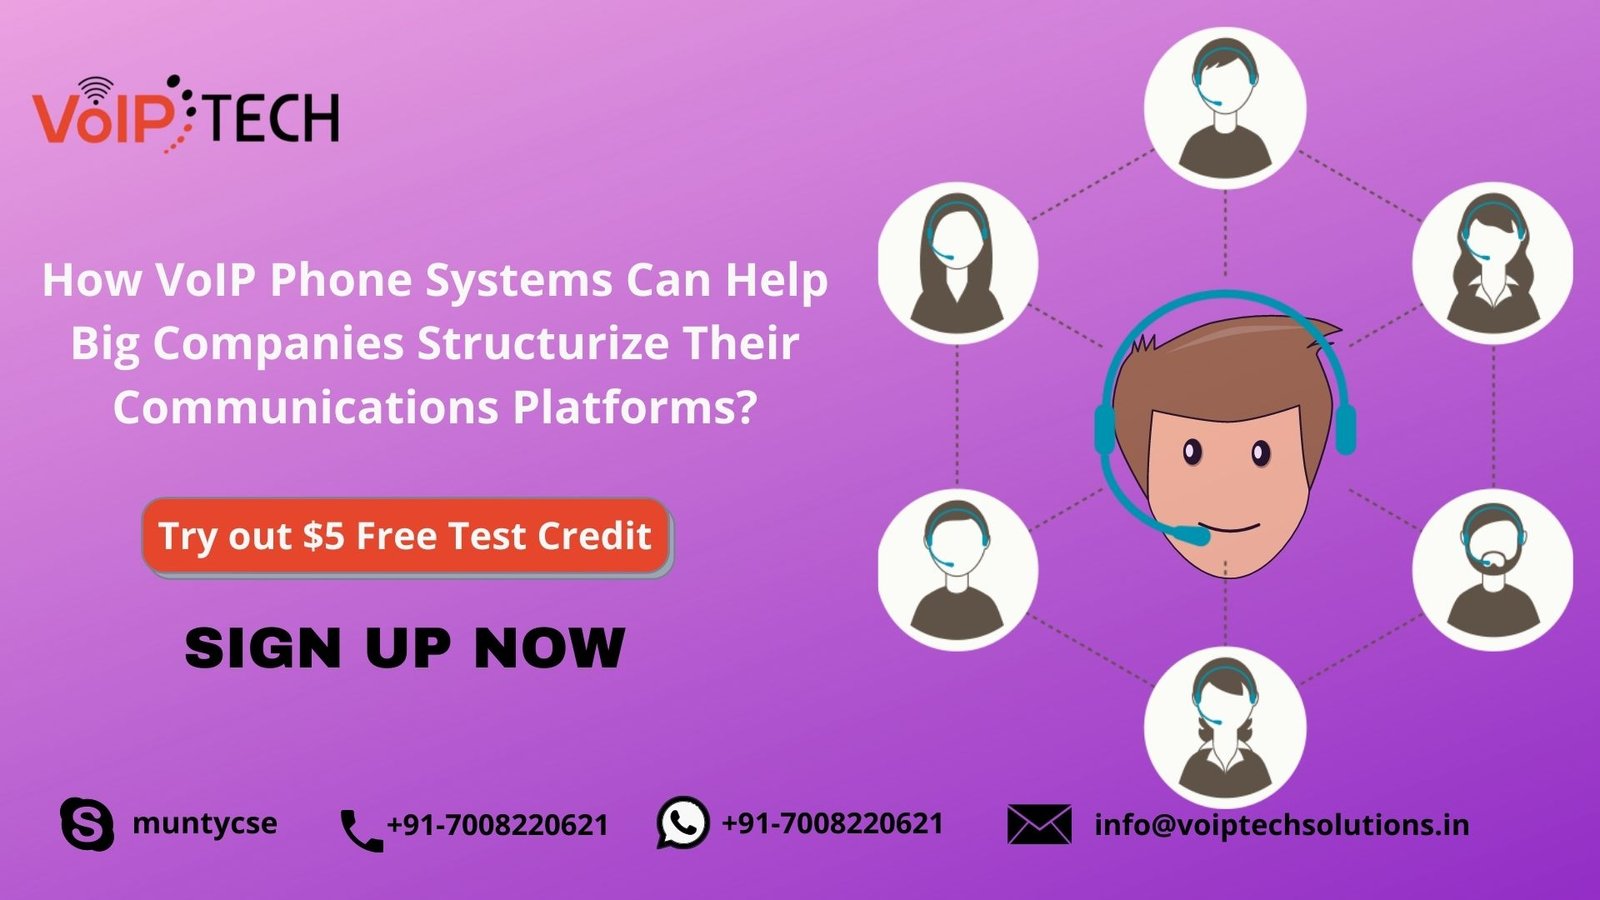 VoIP Phone Systems, How VoIP Phone Systems Can Help Big Companies Structurize Their Communications Platforms?, VoIP tech solutions, vici dialer, virtual number, Voip Providers, voip services in india, best sip provider, business voip providers, VoIP Phone Numbers, voip minutes provider, top voip providers, voip minutes, International VoIP Provider